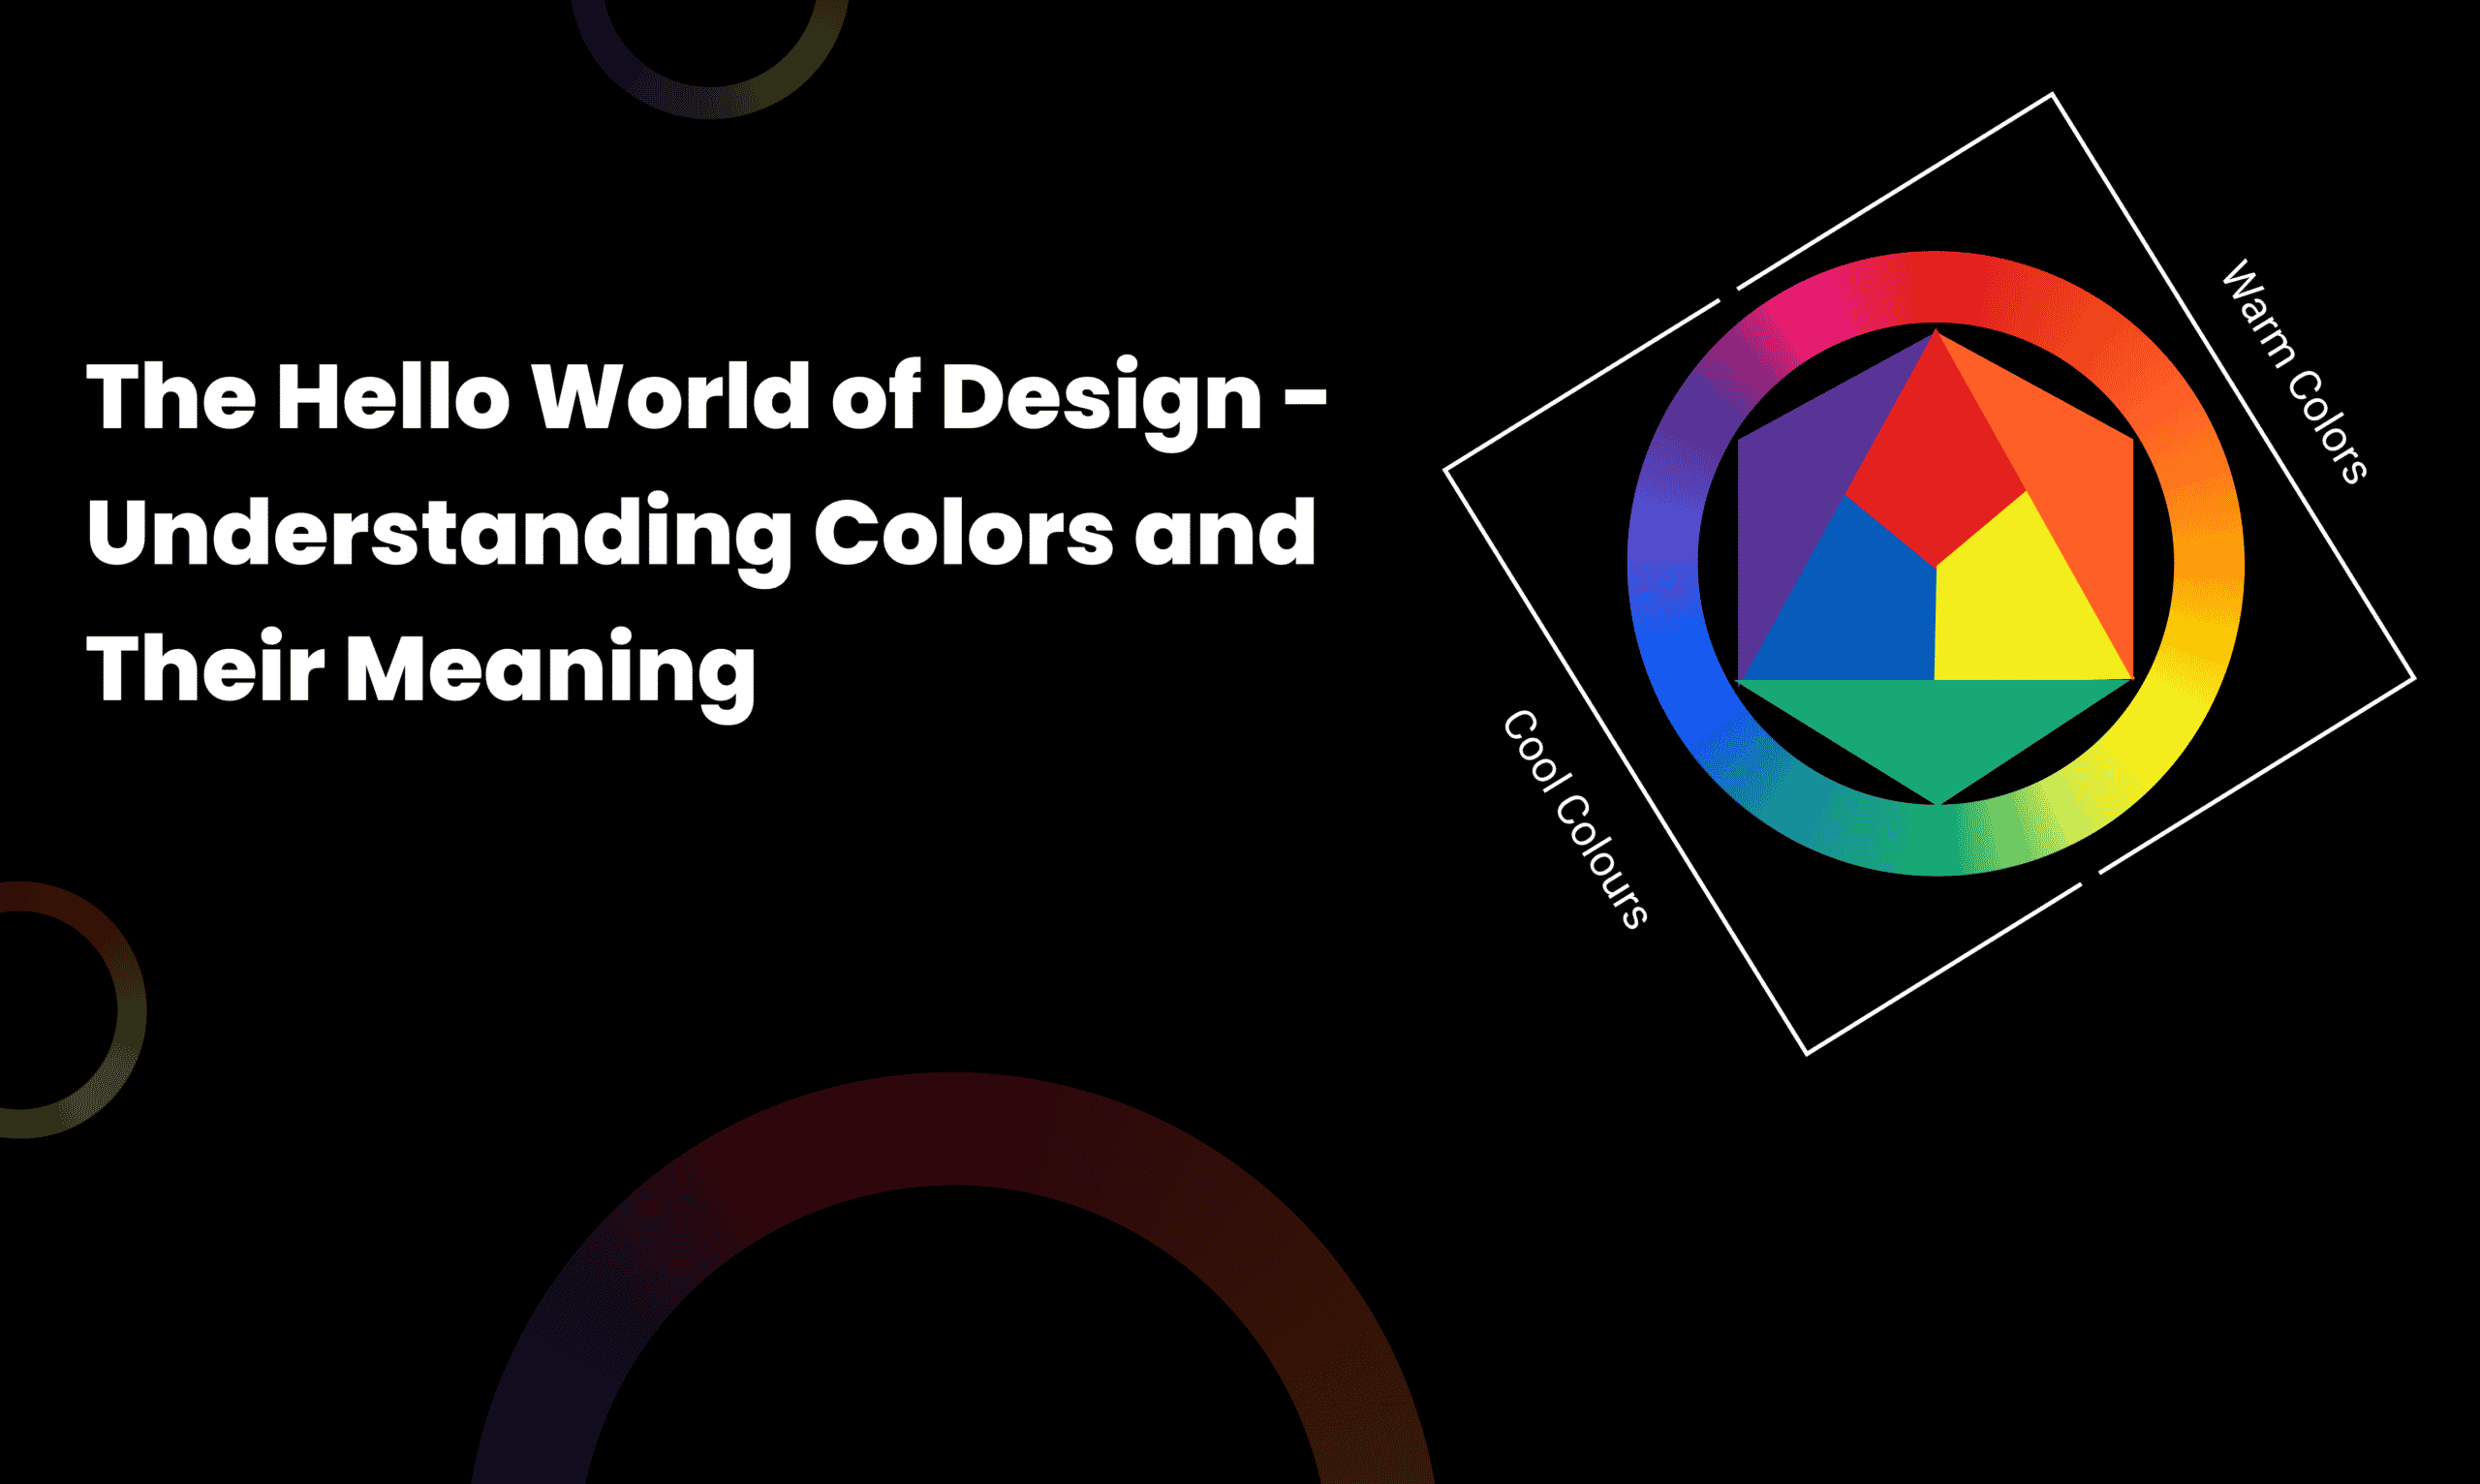 The Hello World of Design - Understanding Colors and Their Meaning